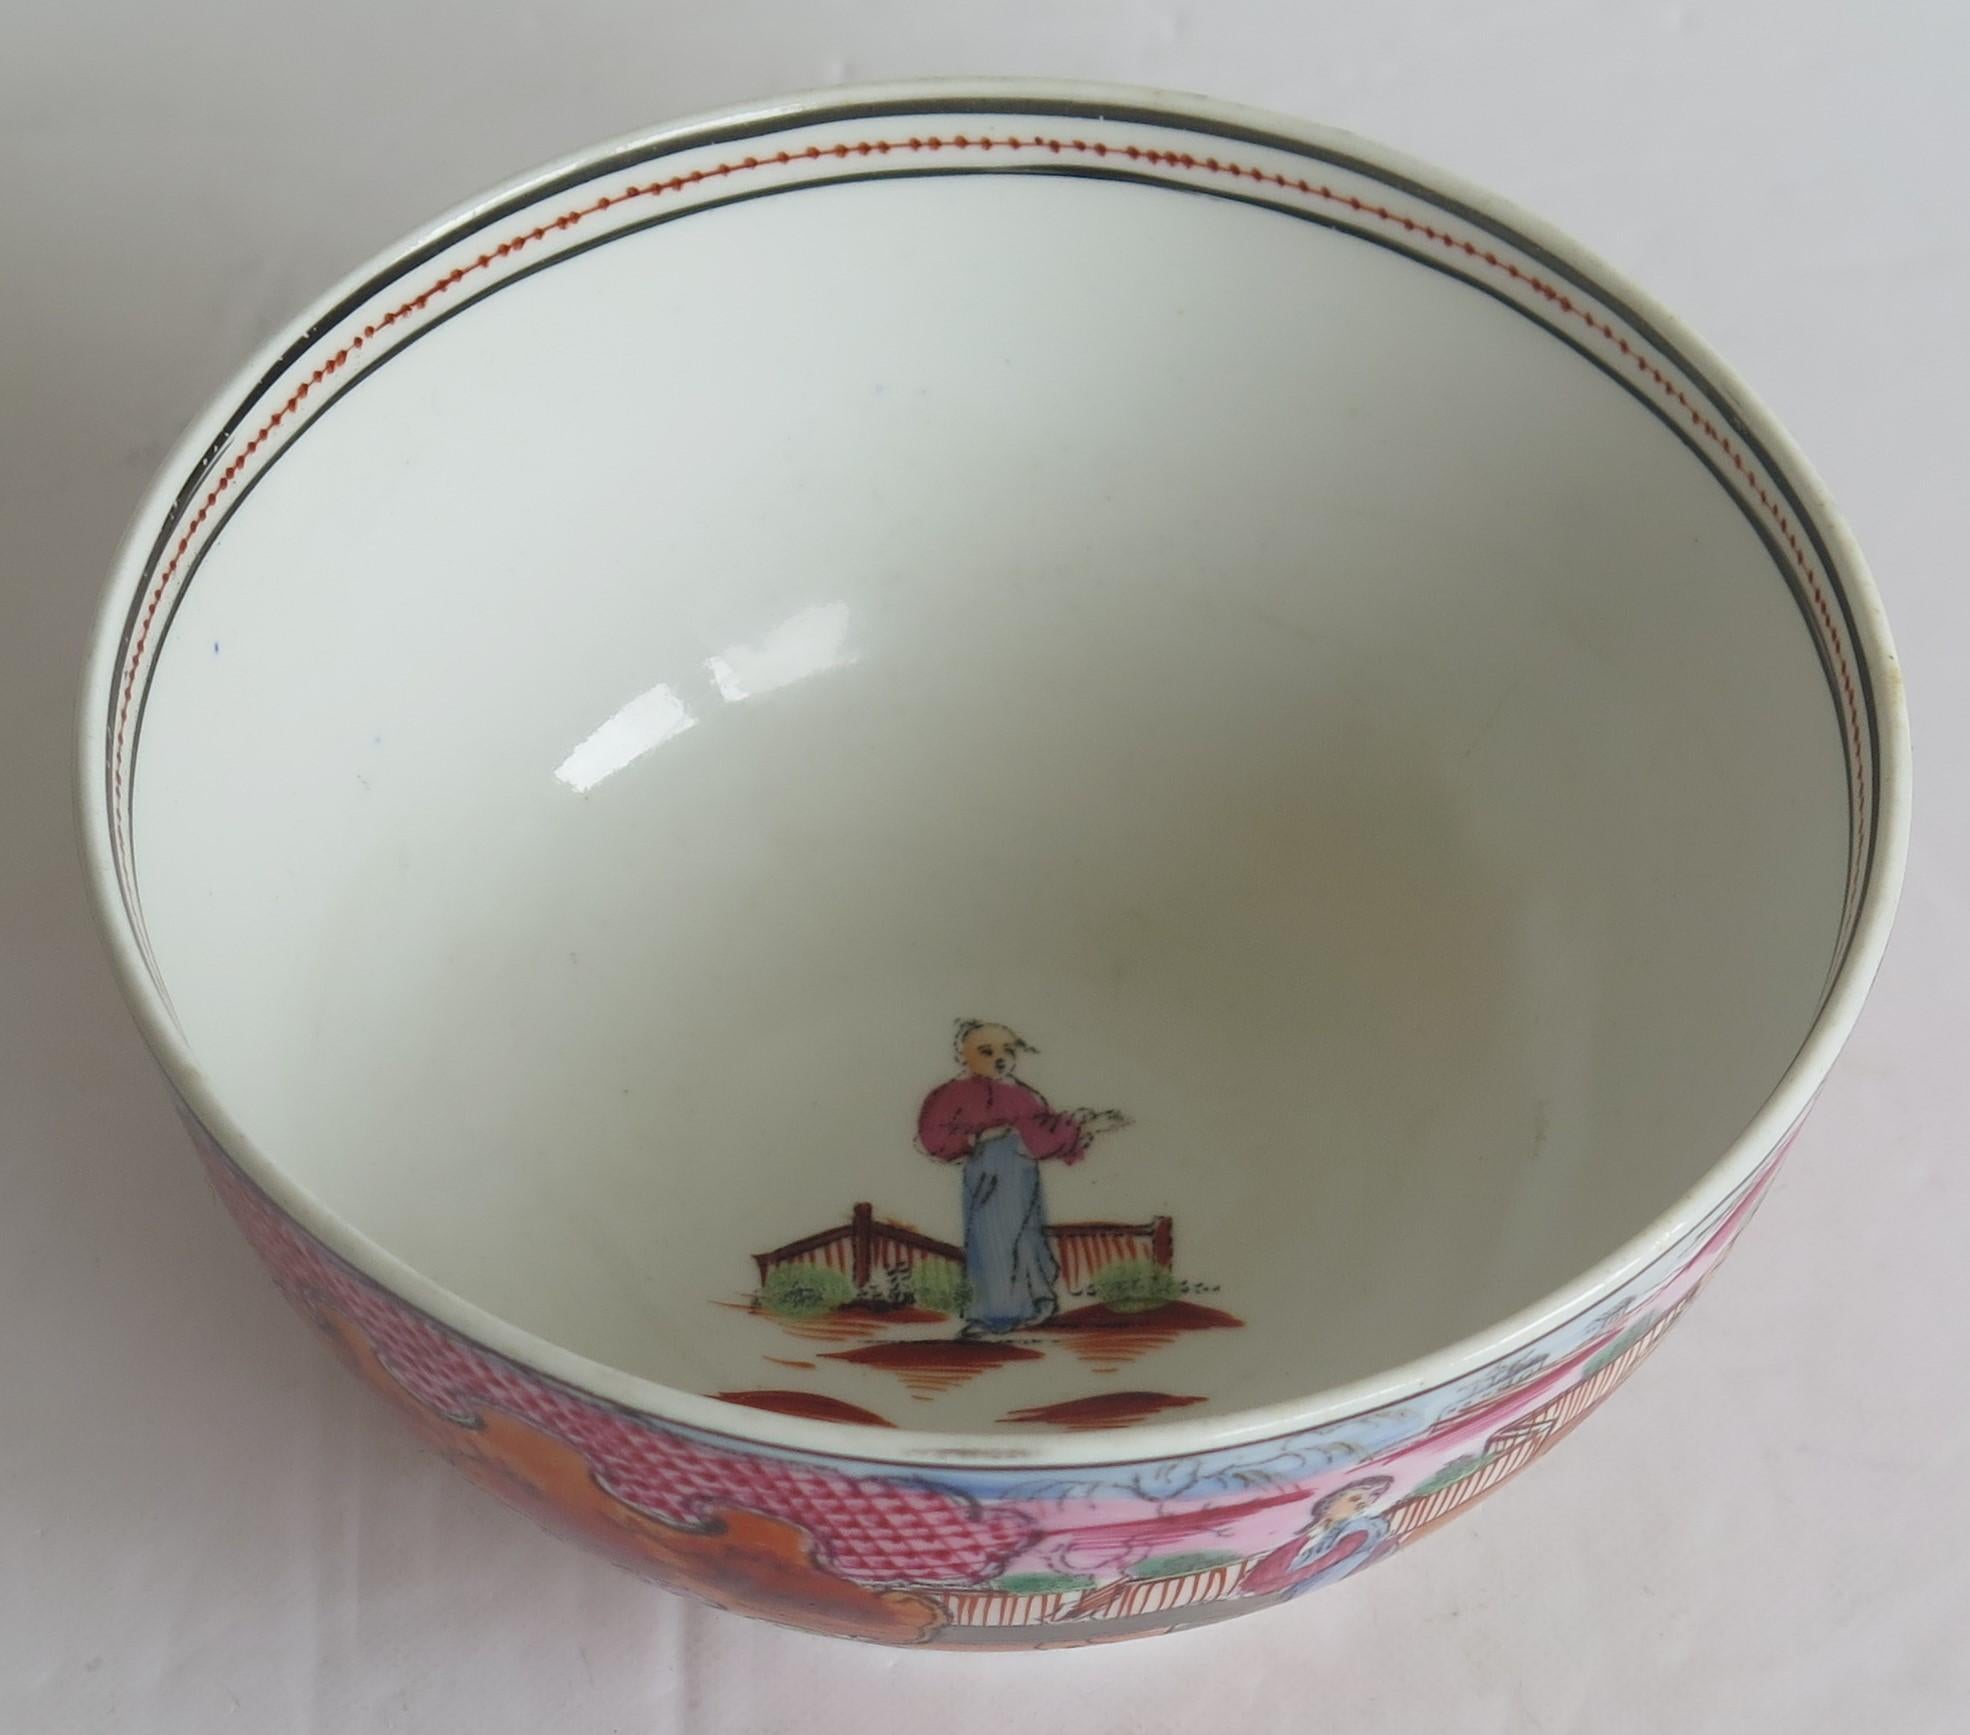 Chinoiserie Early New Hall Porcelain Bowl with Boy in Window Pattern No. 425, circa 1800 For Sale